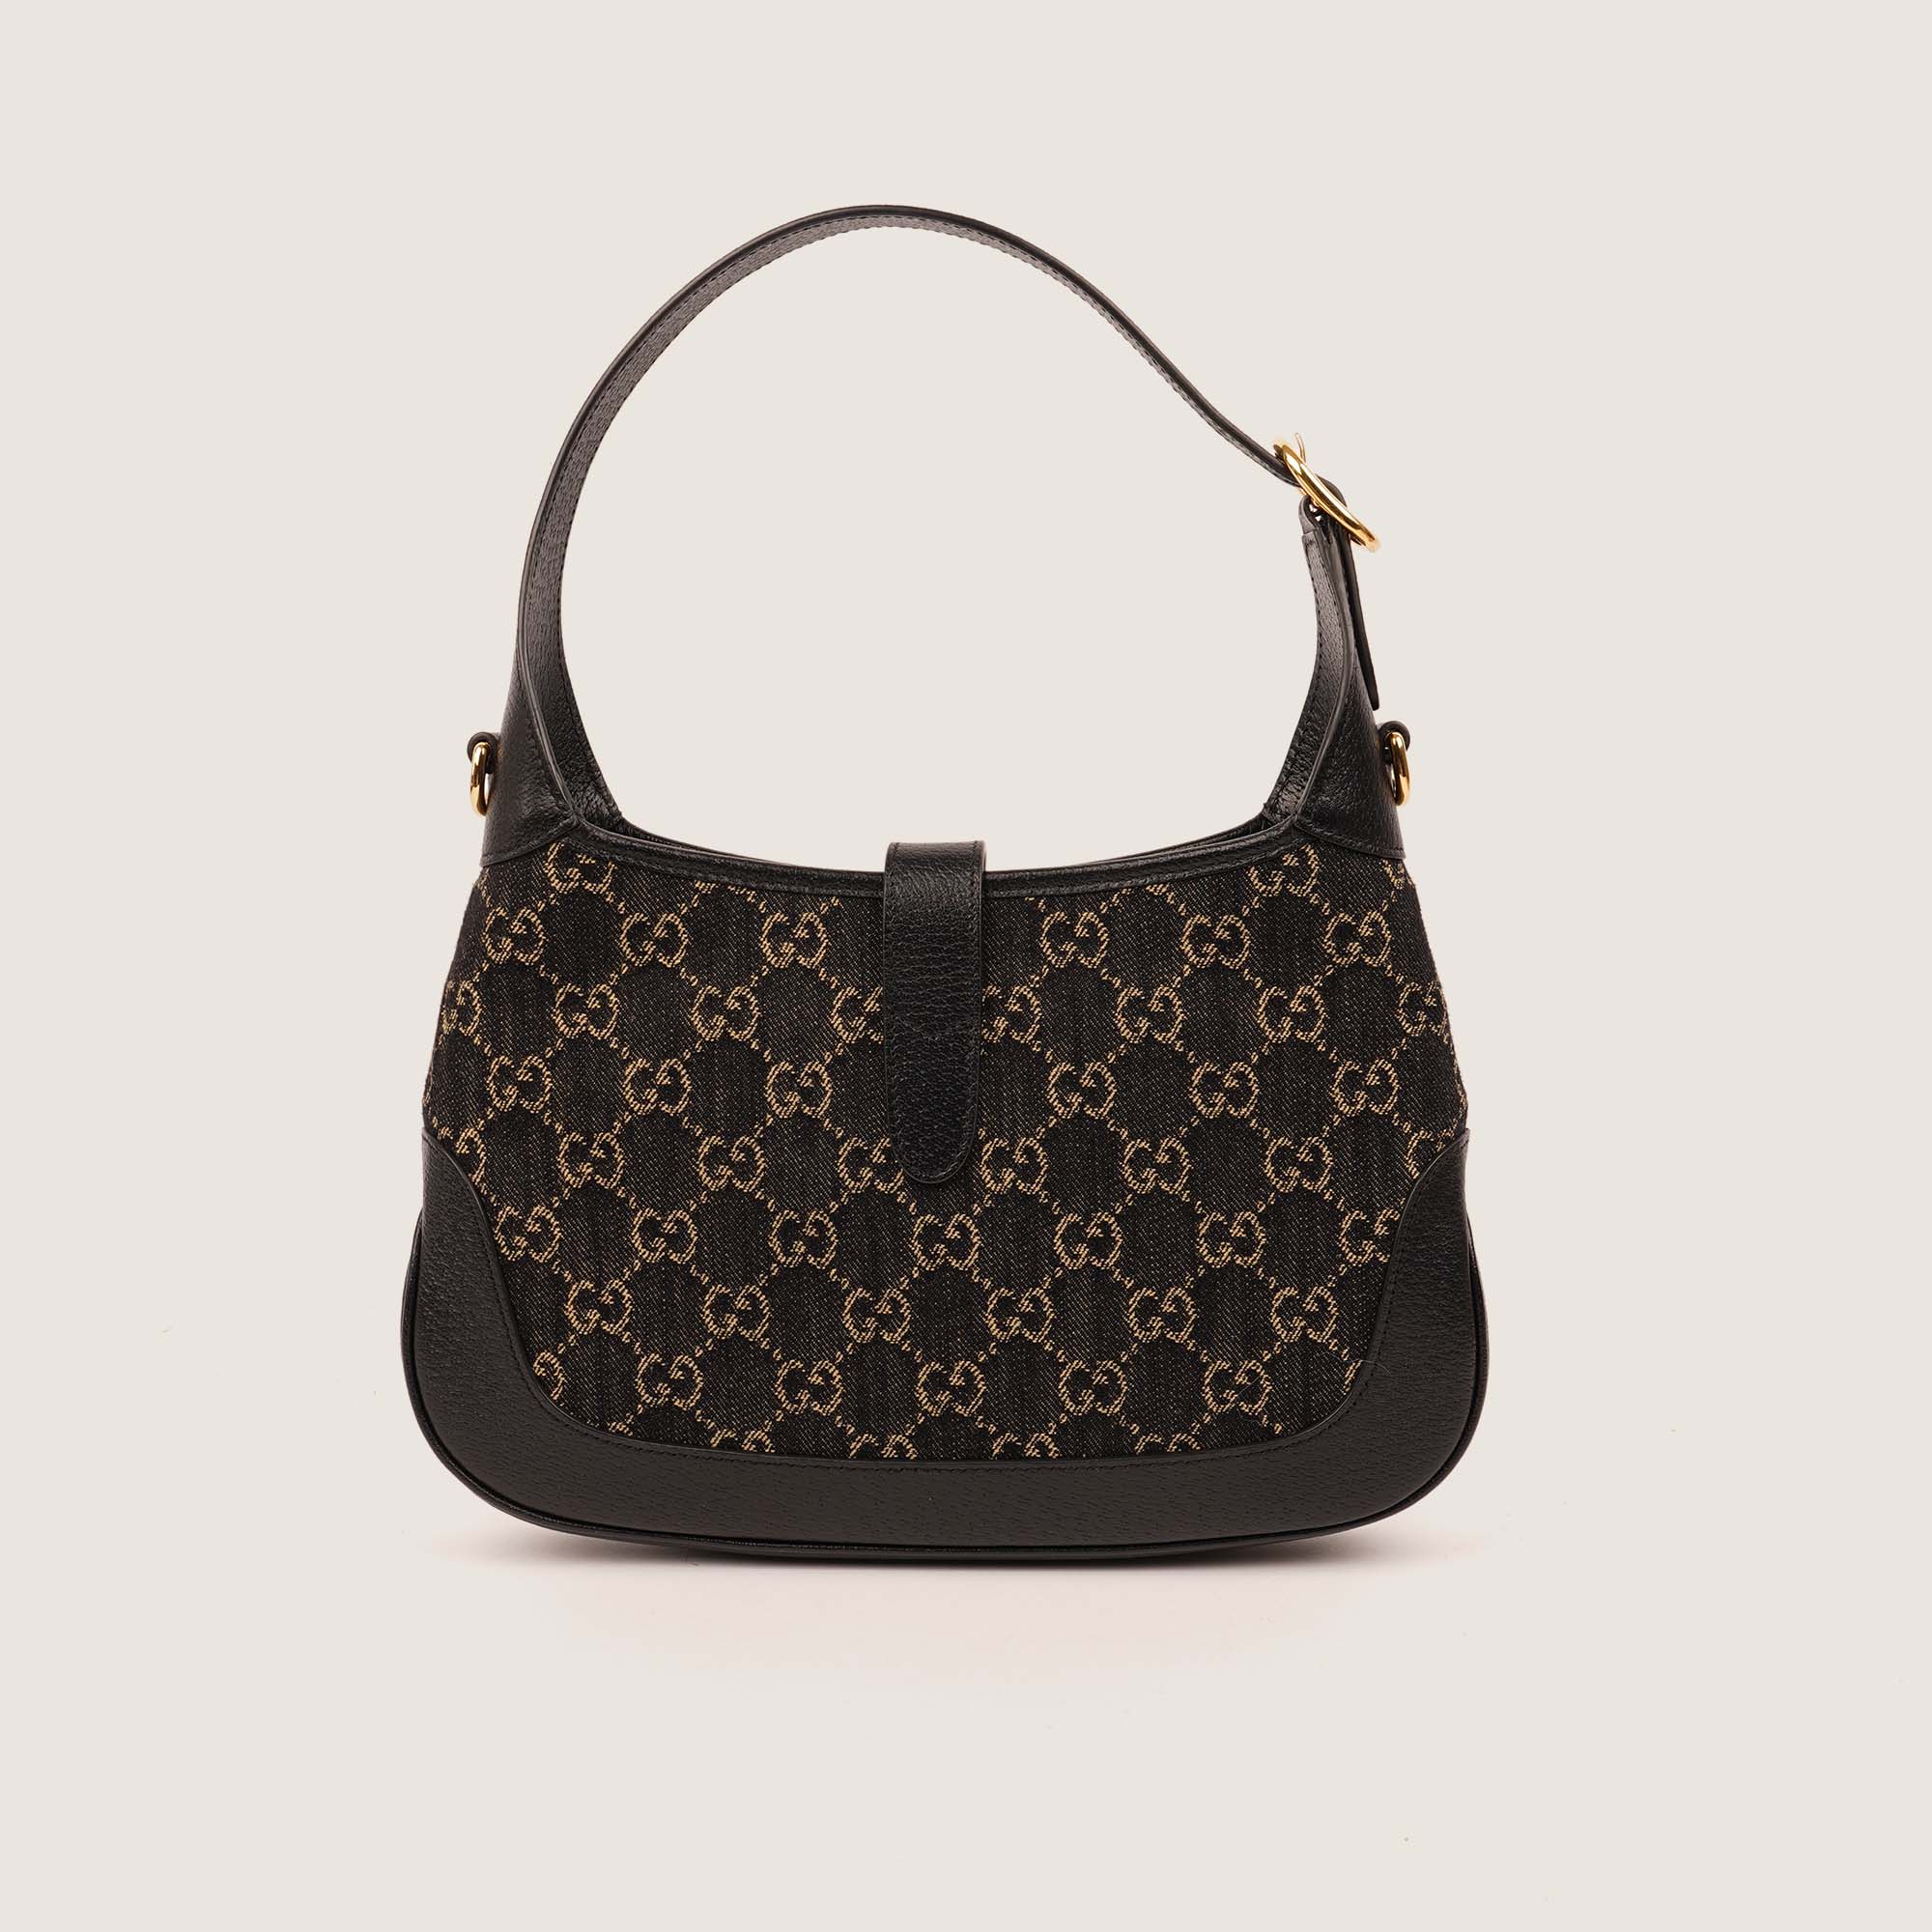 Jackie 1961 Small Shoulder Bag - GUCCI - Affordable Luxury image